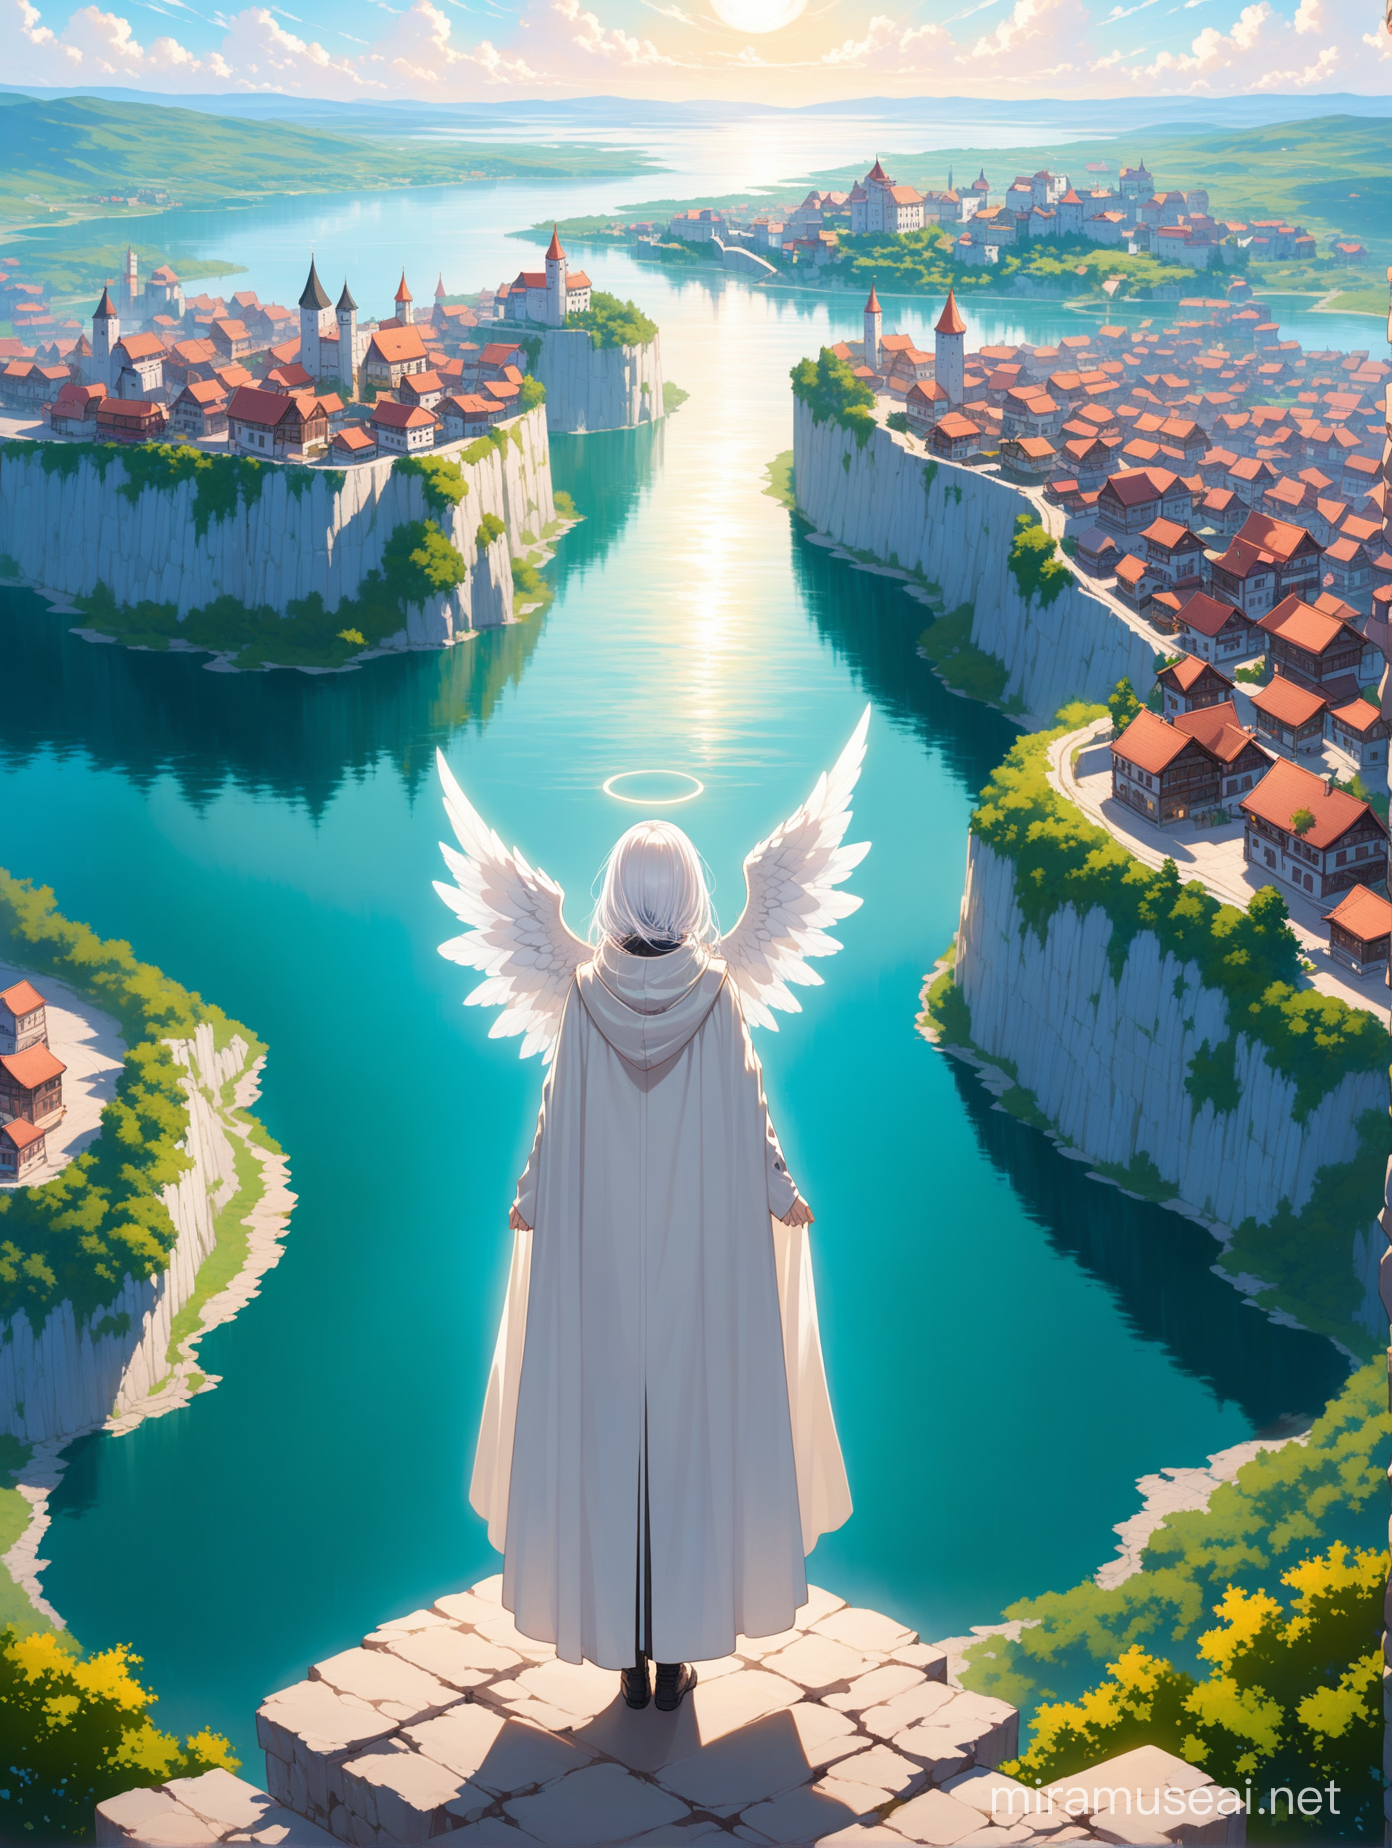 WhiteHaired Woman with Angel Wings Overlooking Cliffside Town